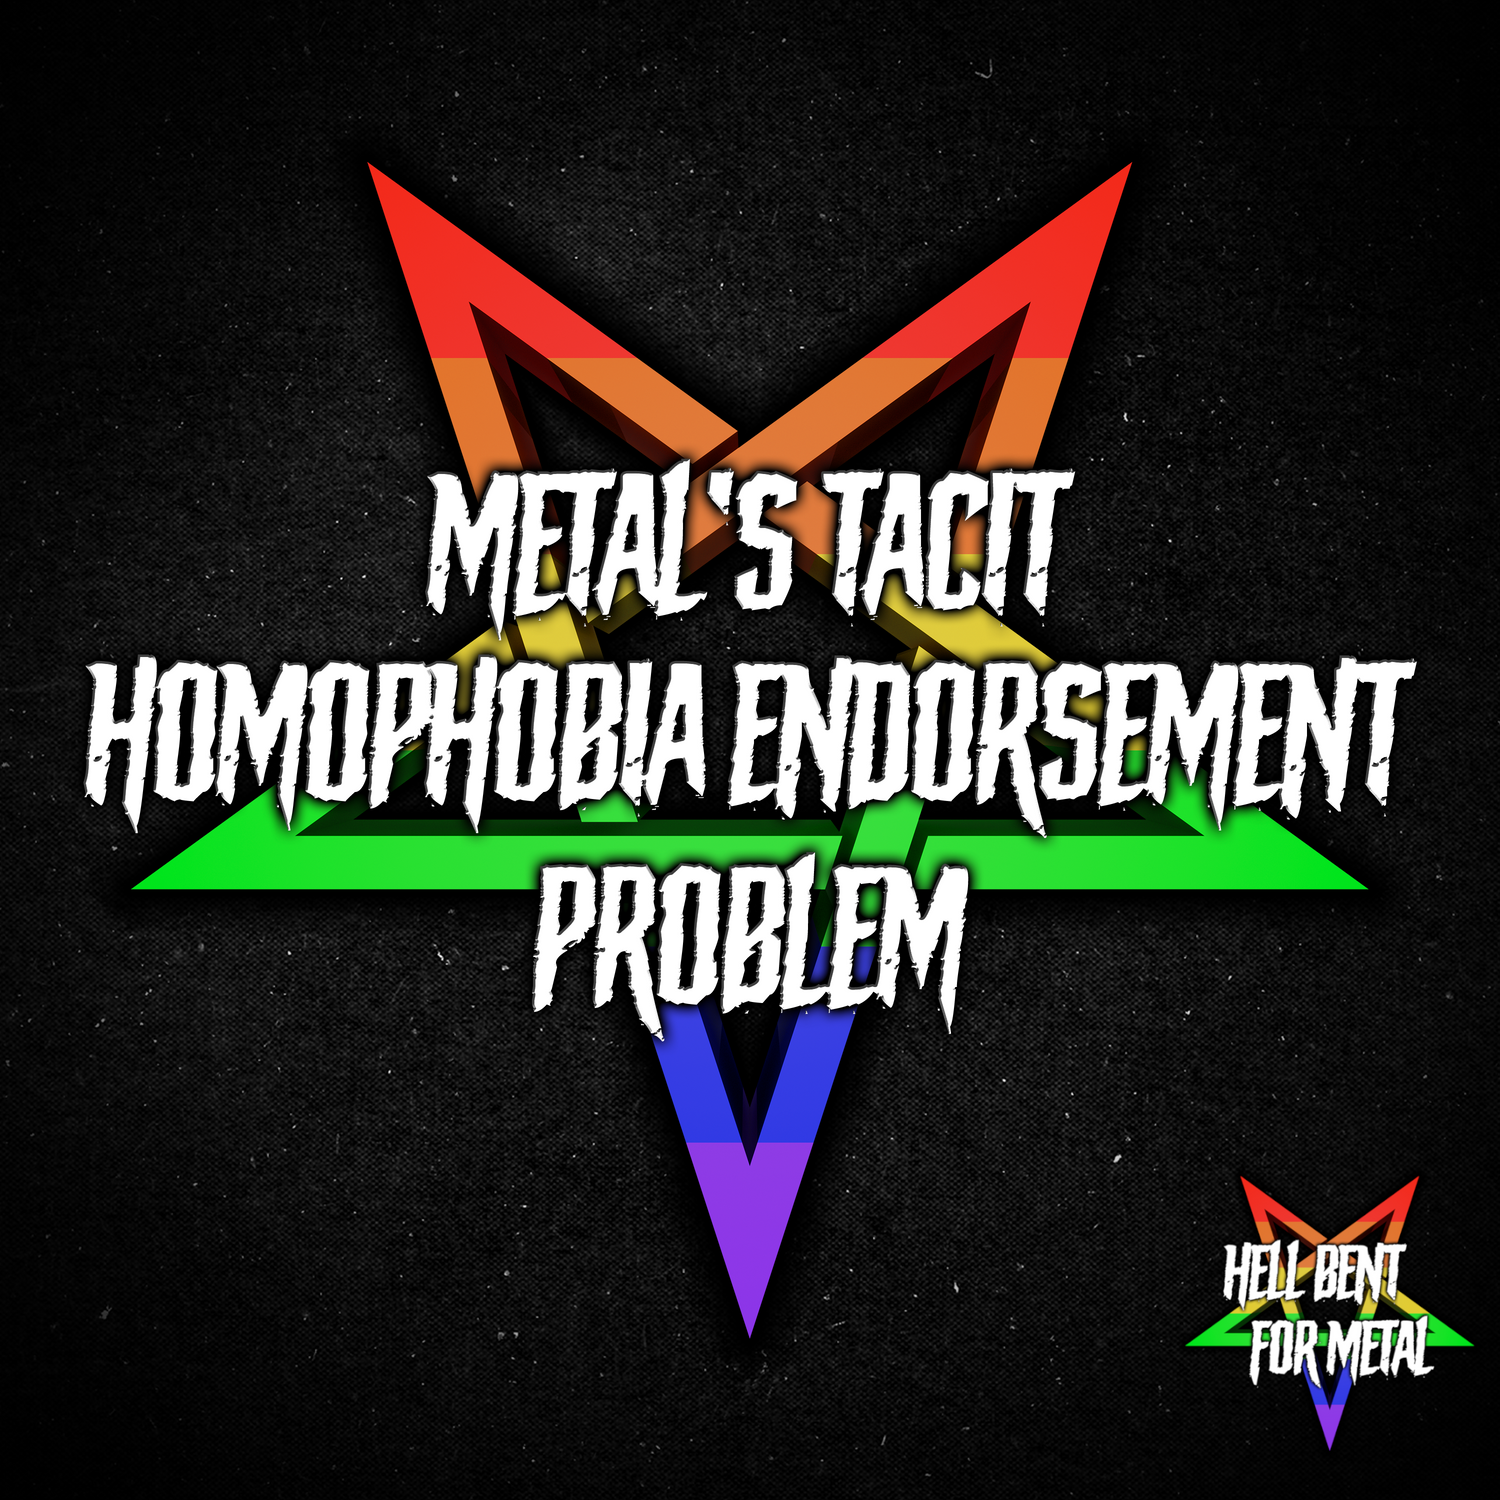 Metal's Tacit Homophobia Endorsement Problem on the latest Hell Bent for Metal